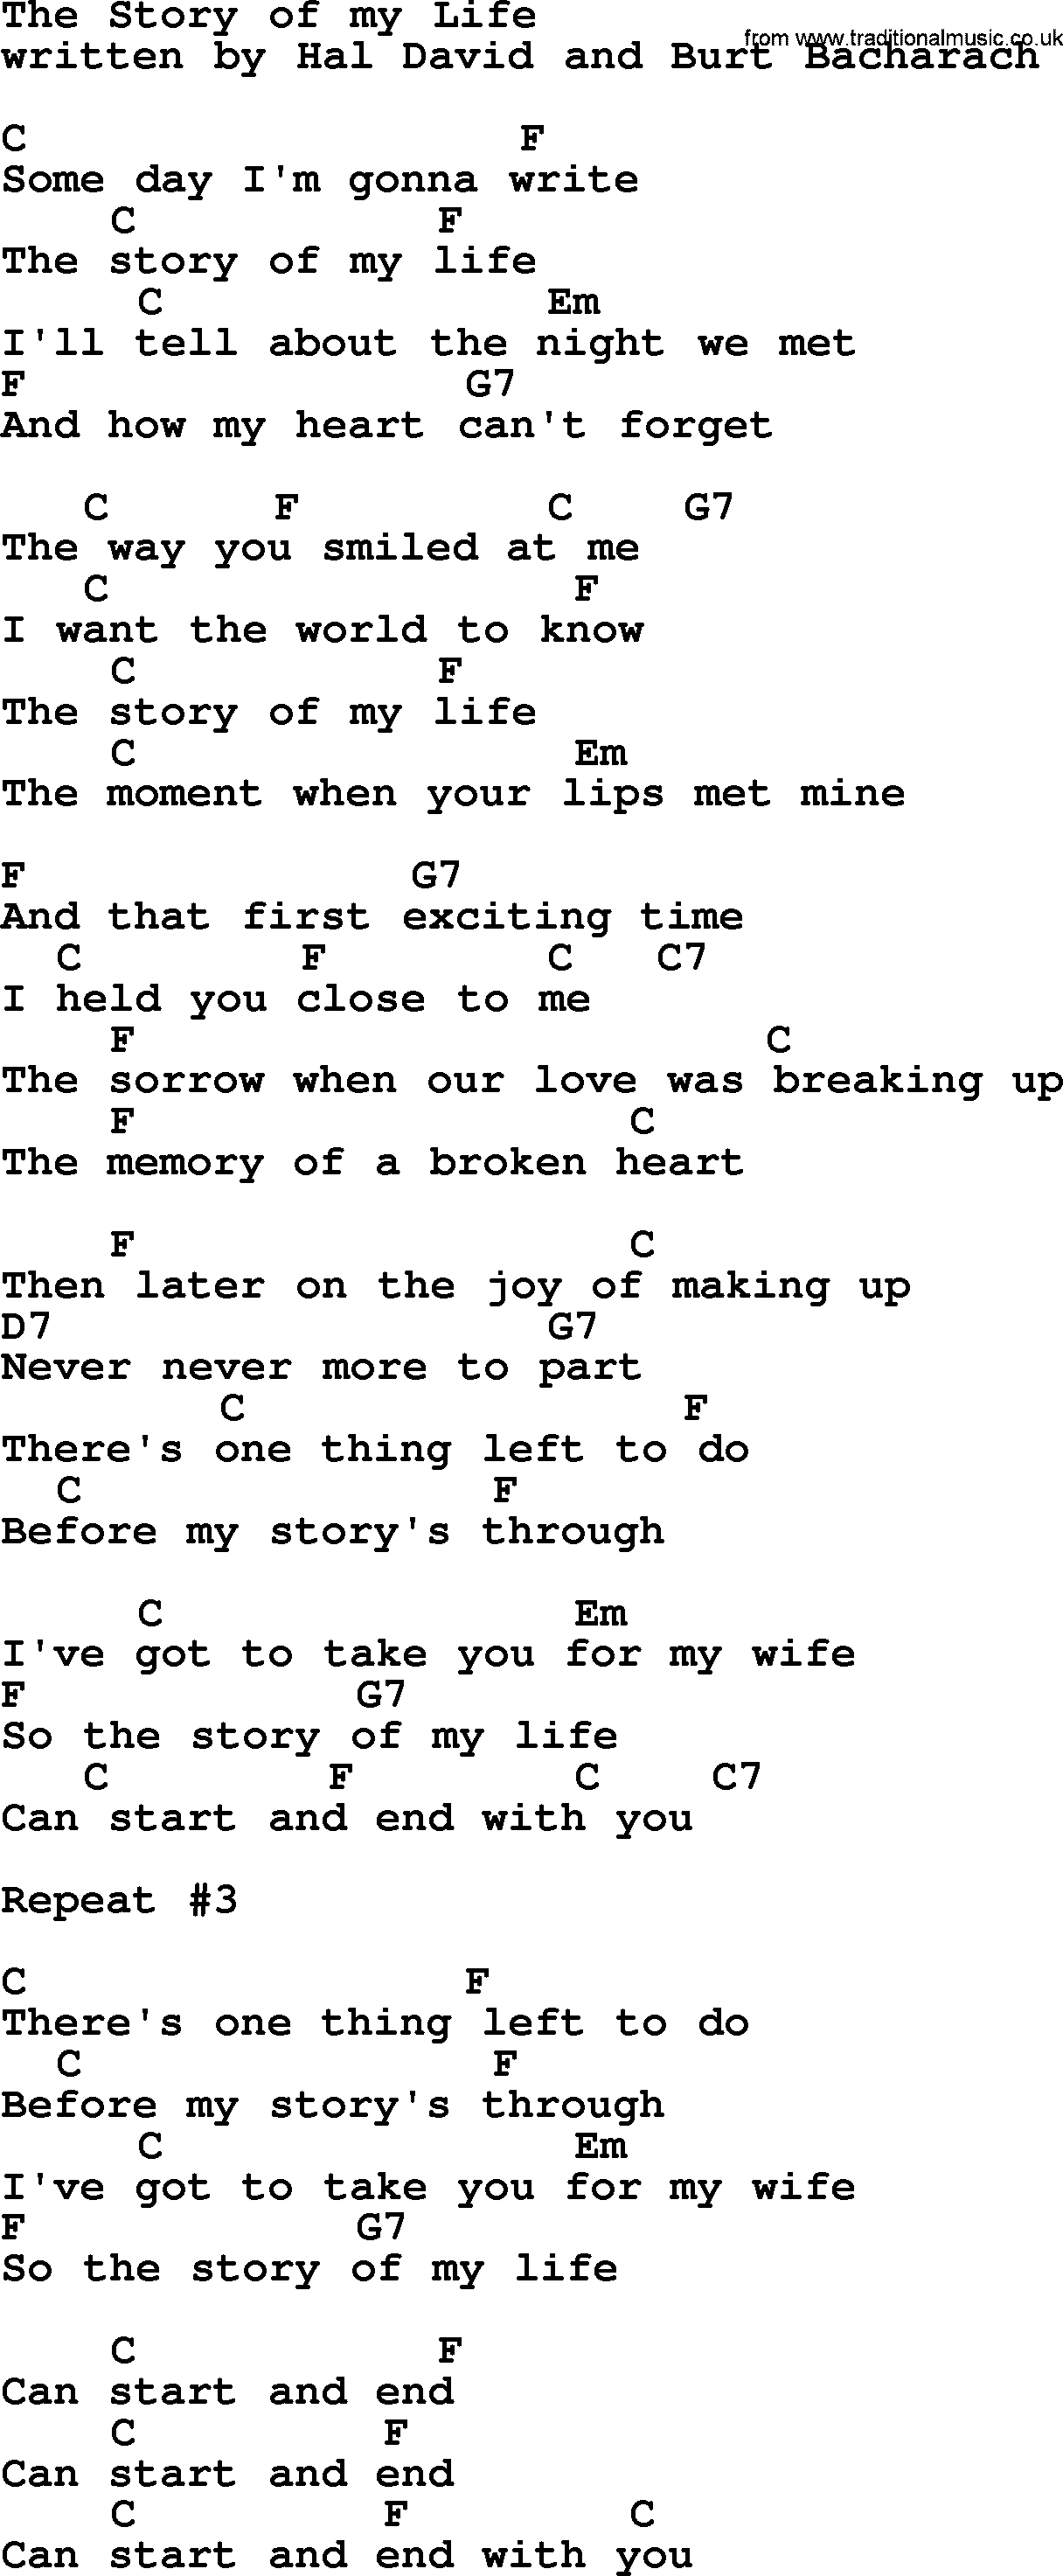 The Story of my Life, by Marty Robbins - lyrics and chords